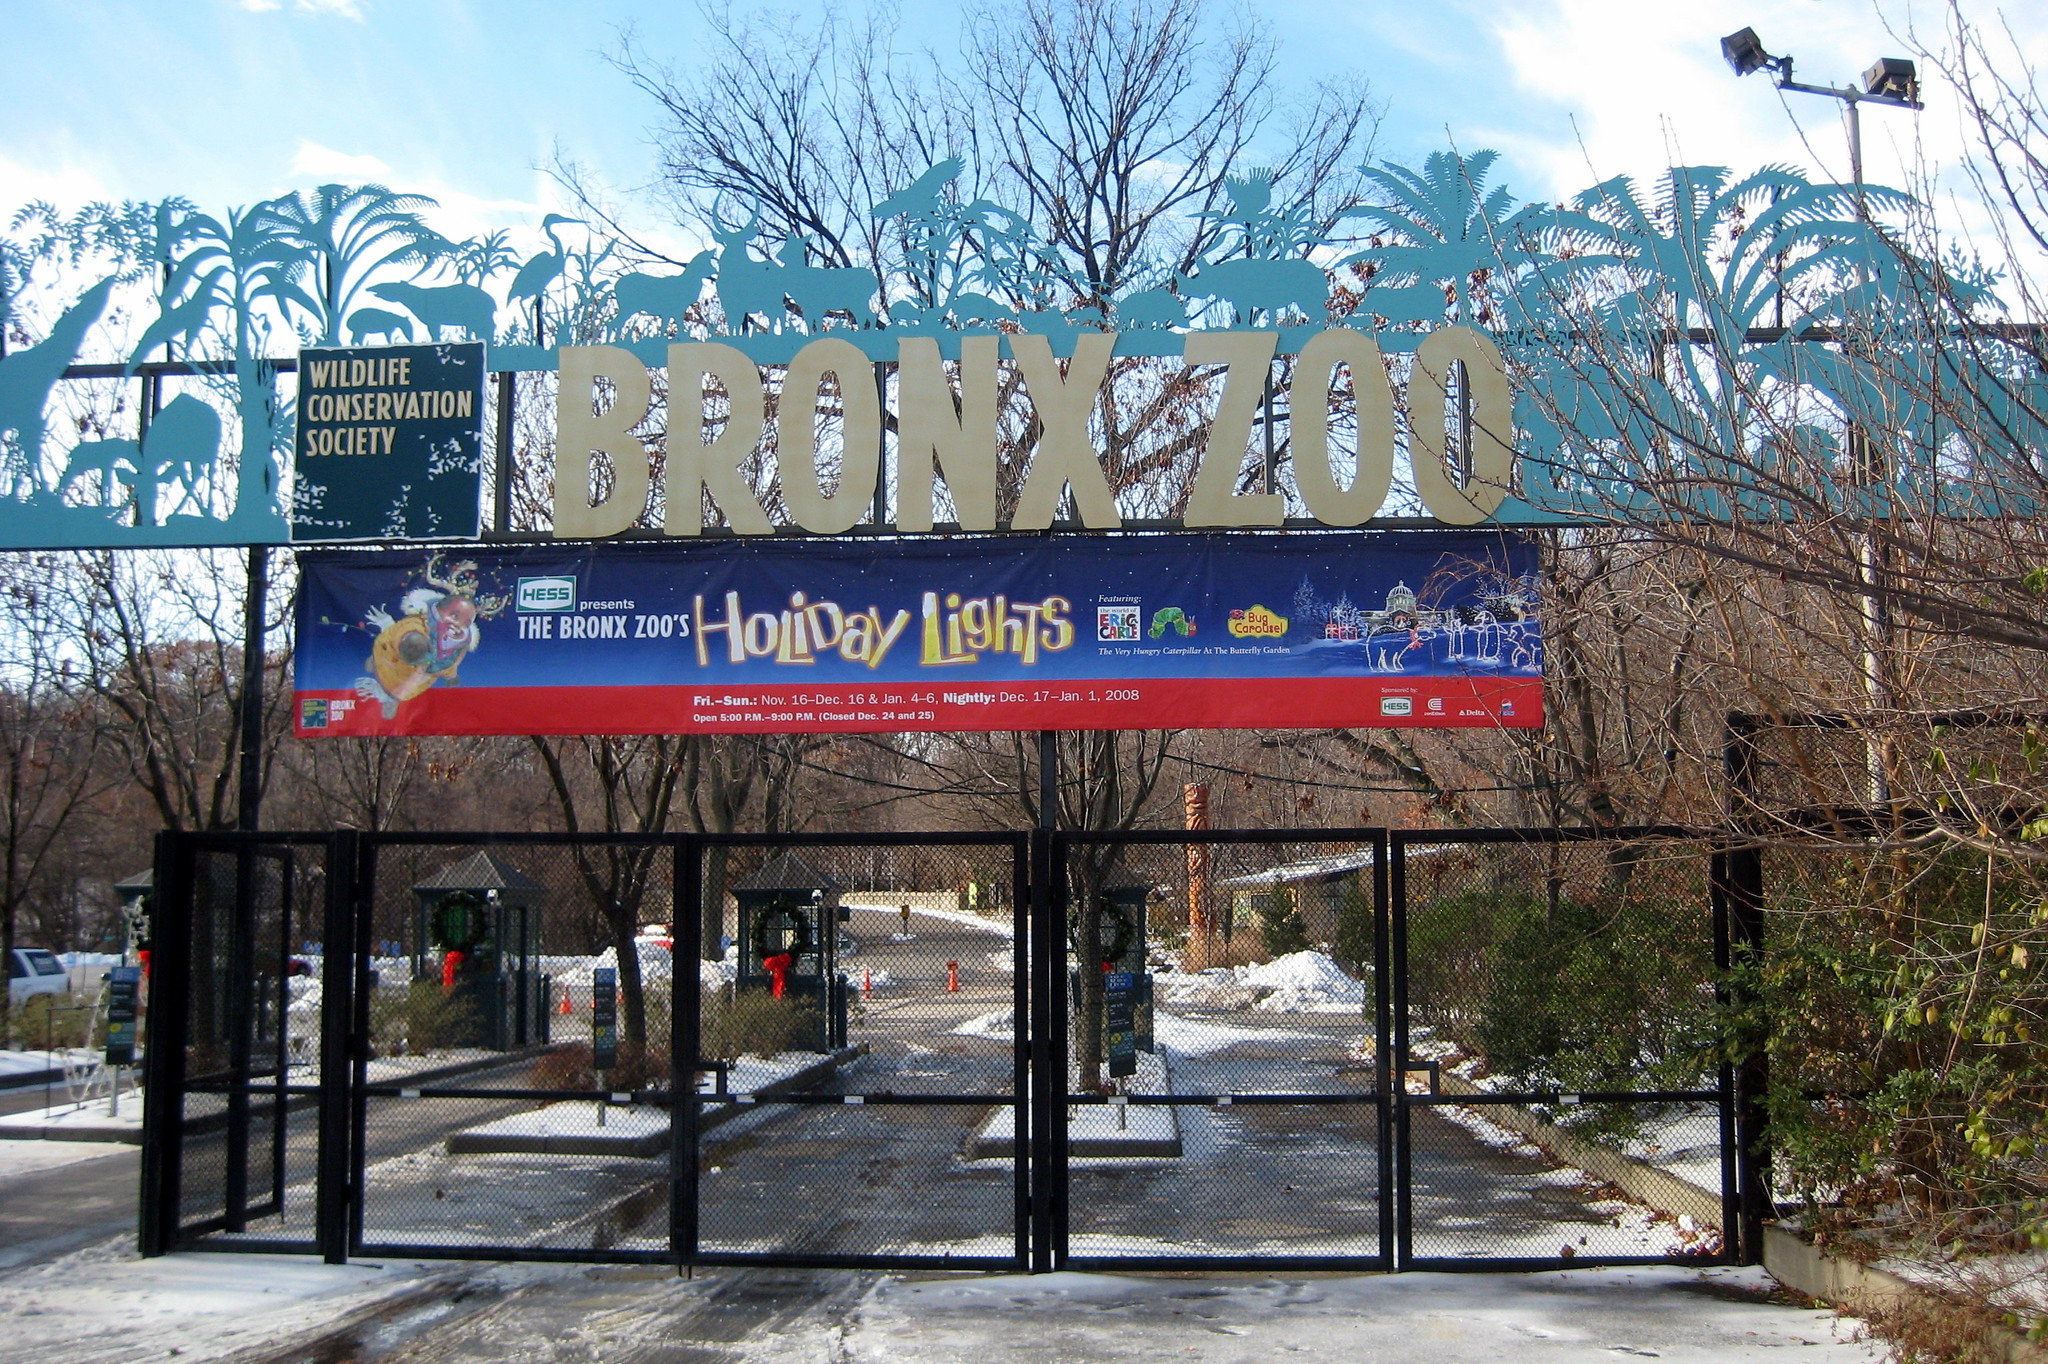 <p>The Bronx Zoo is a zoo within Bronx Park in the Bronx, New York. It is one of the largest zoos in the United States, with more than 700 different animal species spread across 265 acres of parkland.</p><p><strong>Features:</strong> Outdoor and Indoor exhibits, rides, animal feedings, events, and more.</p><p>Wally Gobetz, Flickr</p>